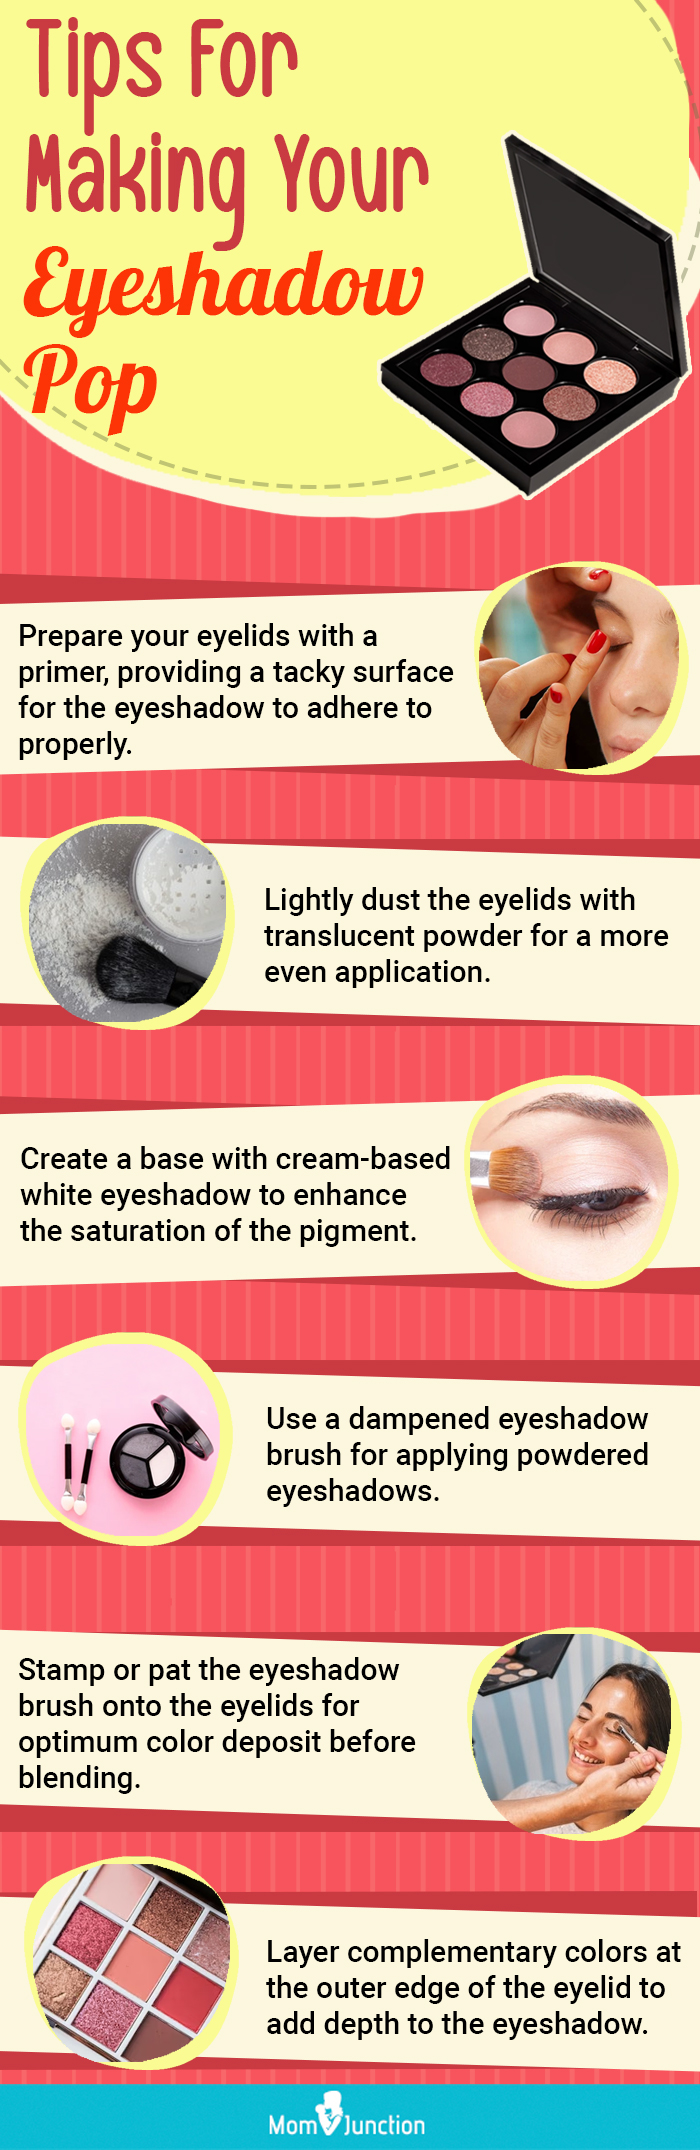 Tips For Making Your Eyeshadow Pop (infographic)